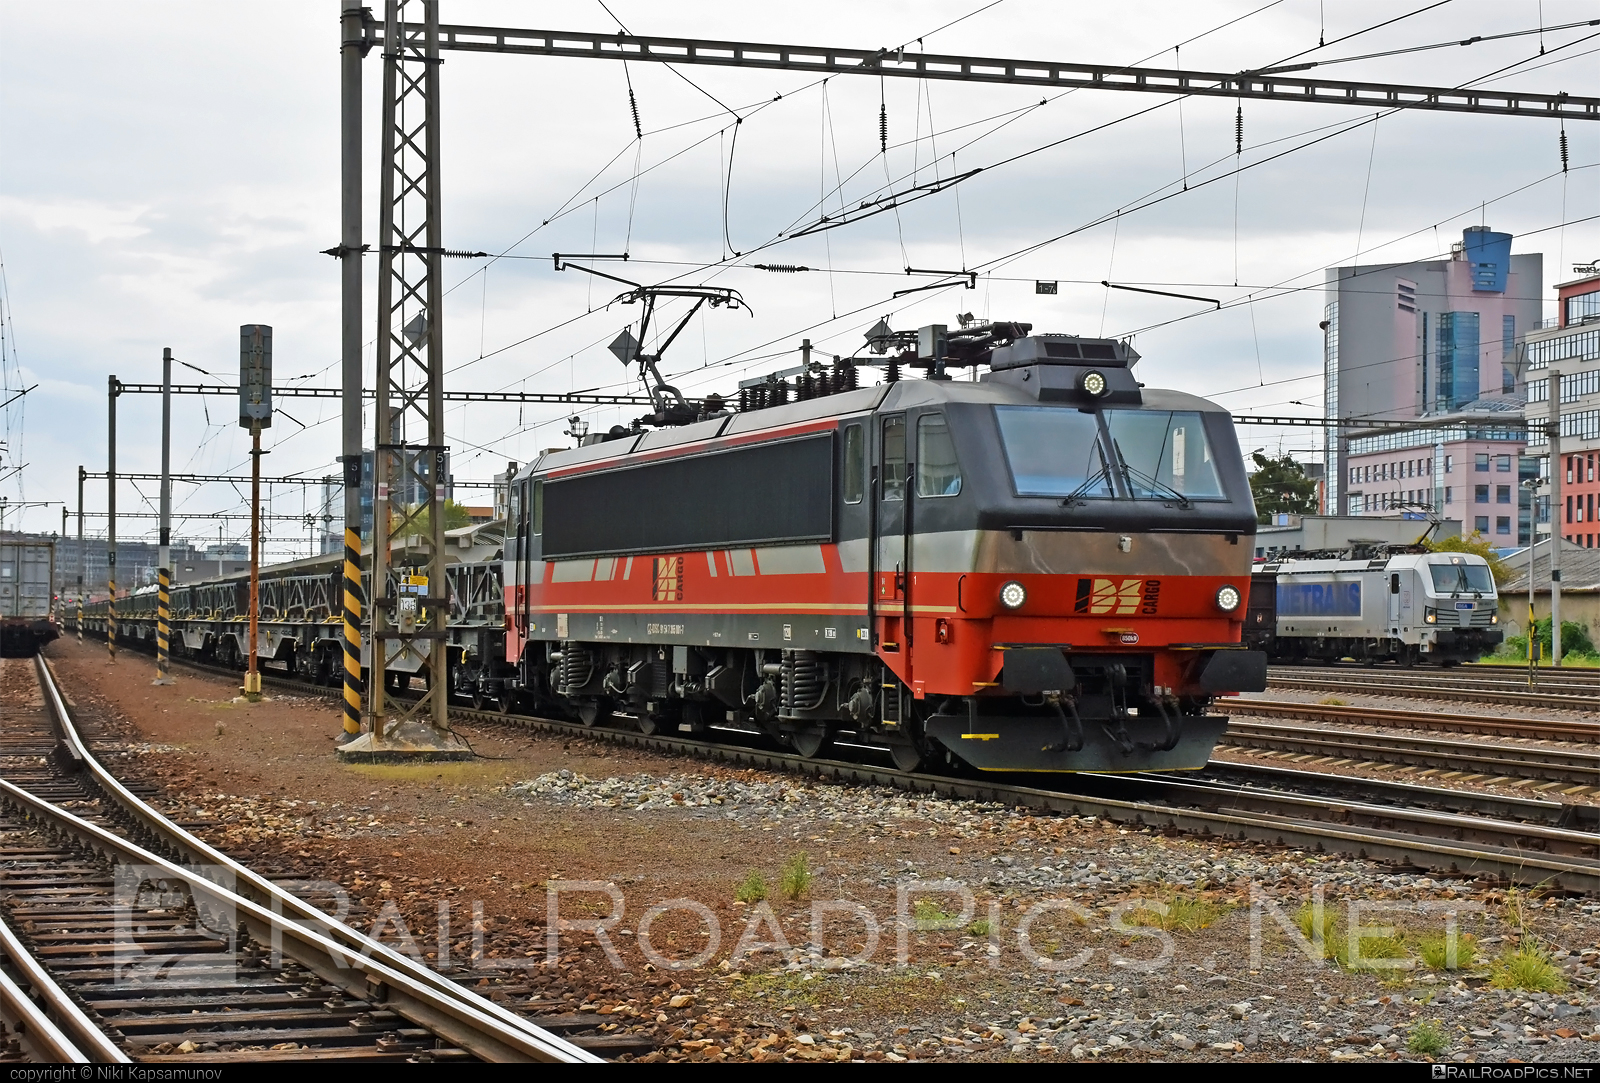 CZ LOKO EffiLiner 3000 - 365 001-7 operated by IDS CARGO a. s. #belgicanka #czloko #effiliner #effiliner3000 #flatwagon #idsc #idscargo #sncb12 #sncbclass12